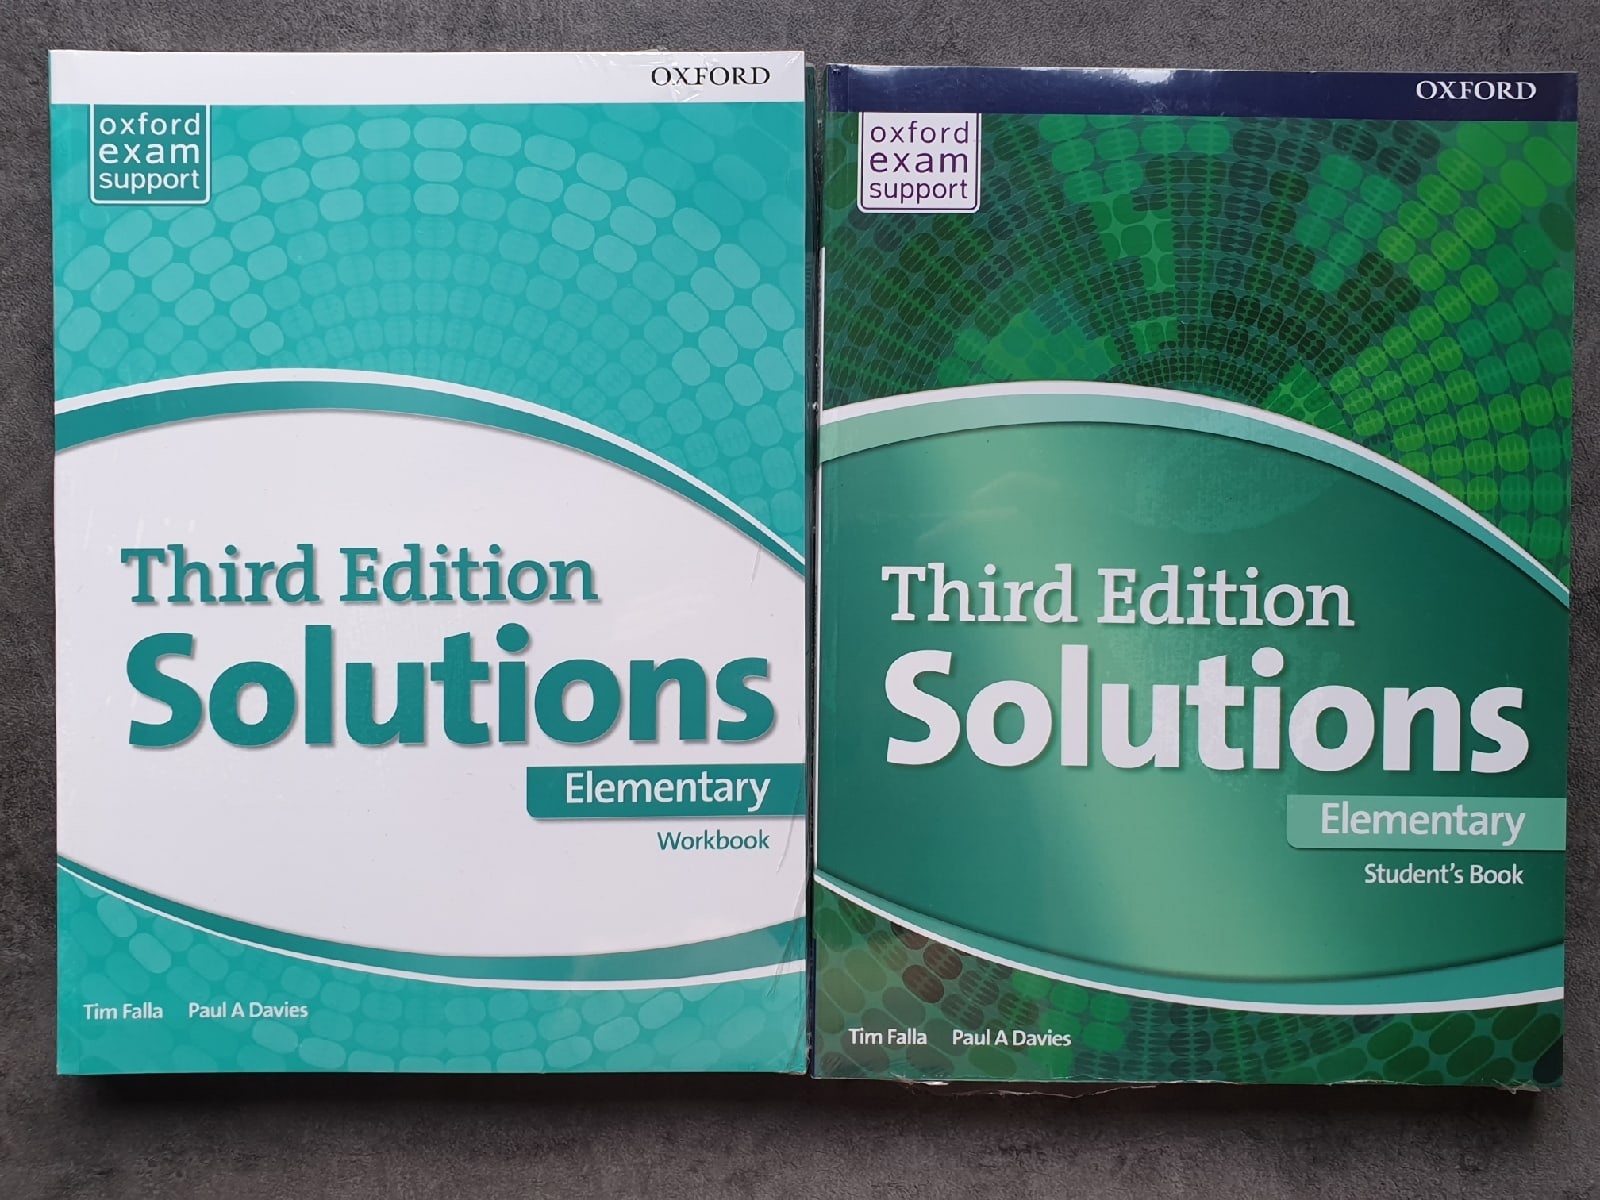 Solutions 3 edition elementary books. Учебник solutions Elementary. Solutions Elementary: Workbook. Third Edition solutions. Учебник third Edition solutions Elementary.